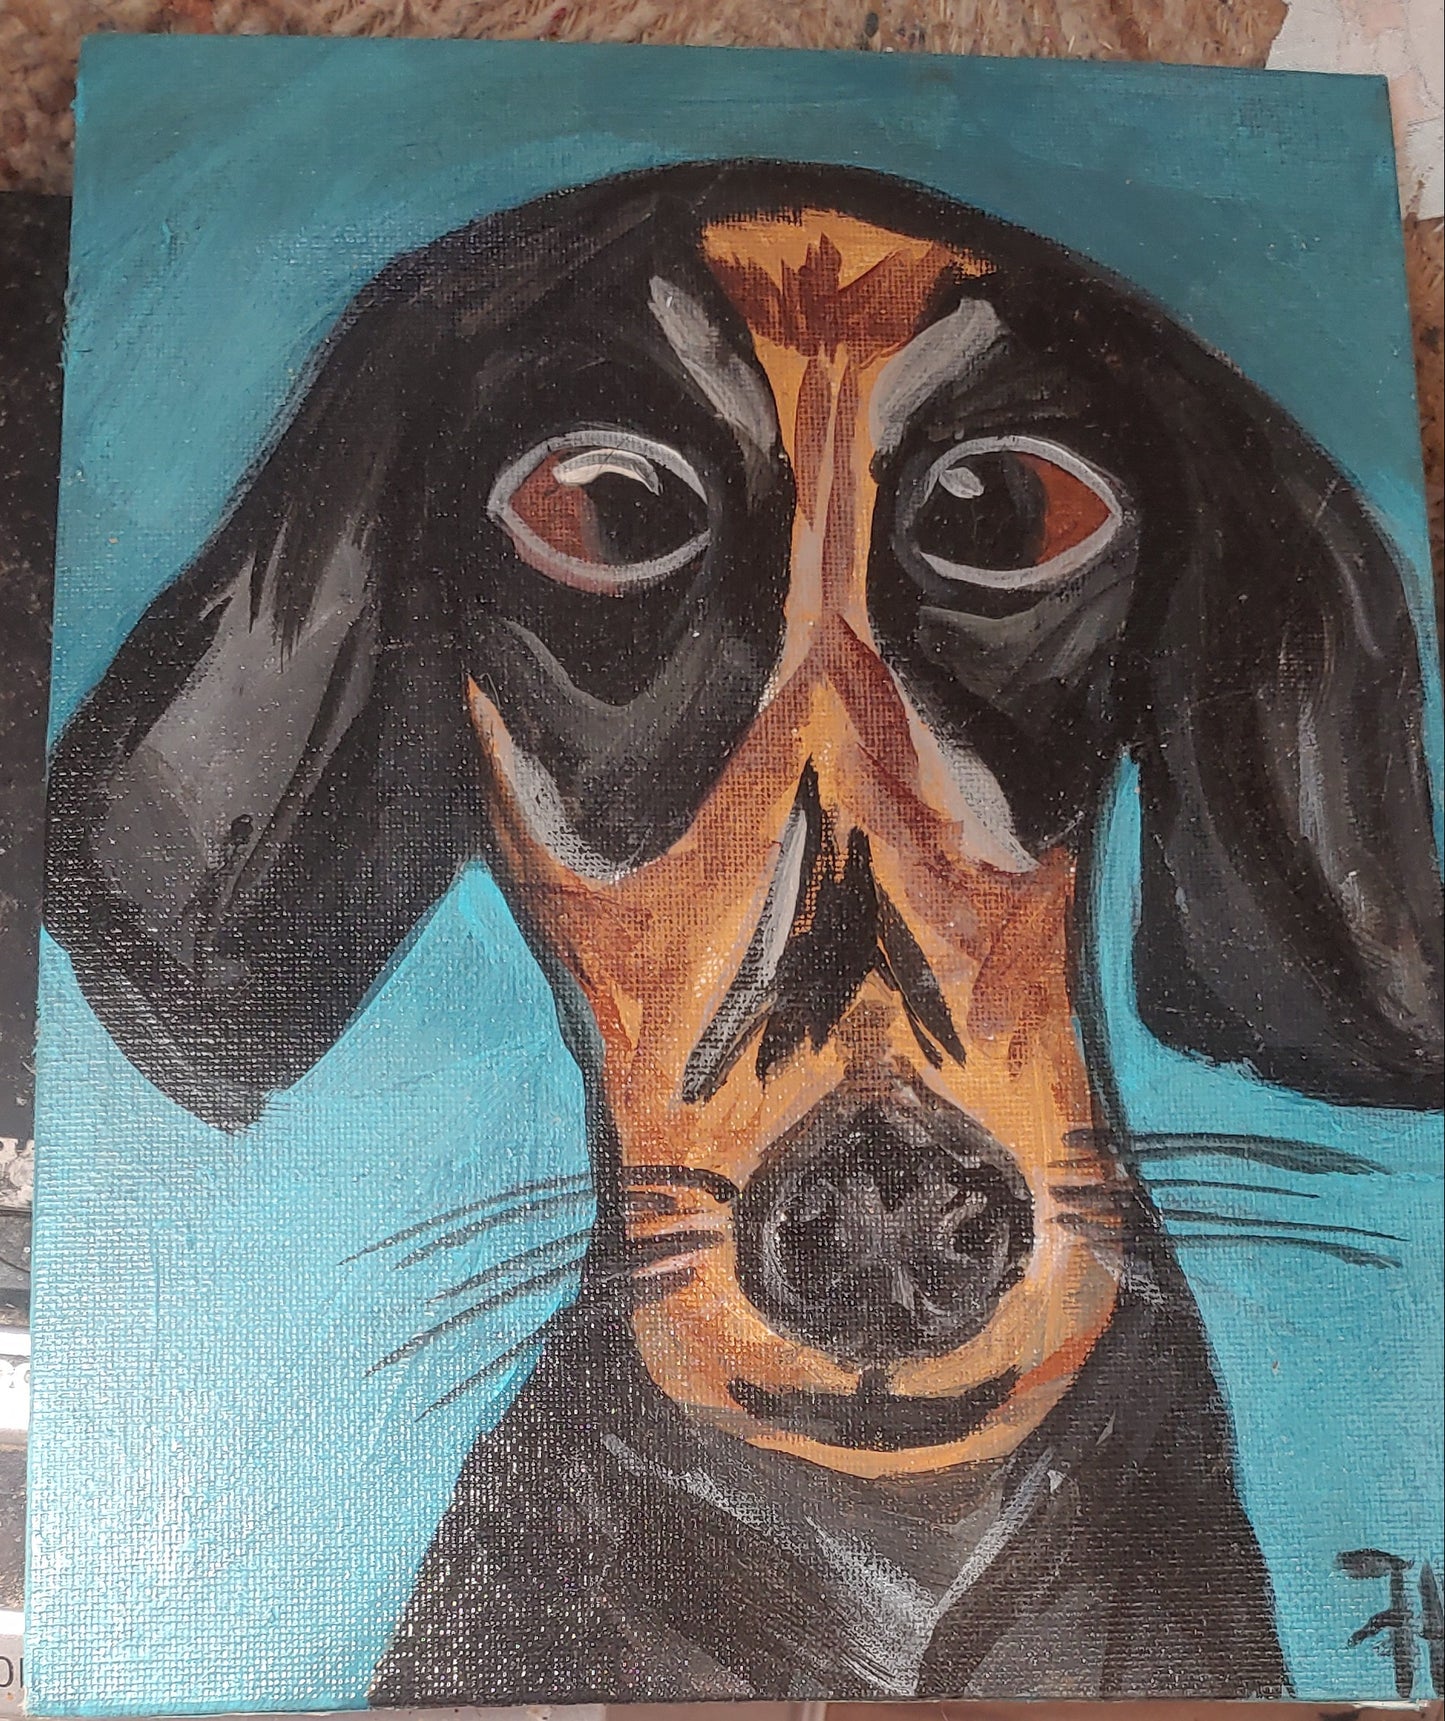 big  sale Was $20 now $10 ...dachshund dog doxie weiner dog painting 8 x 10 inches on canvas